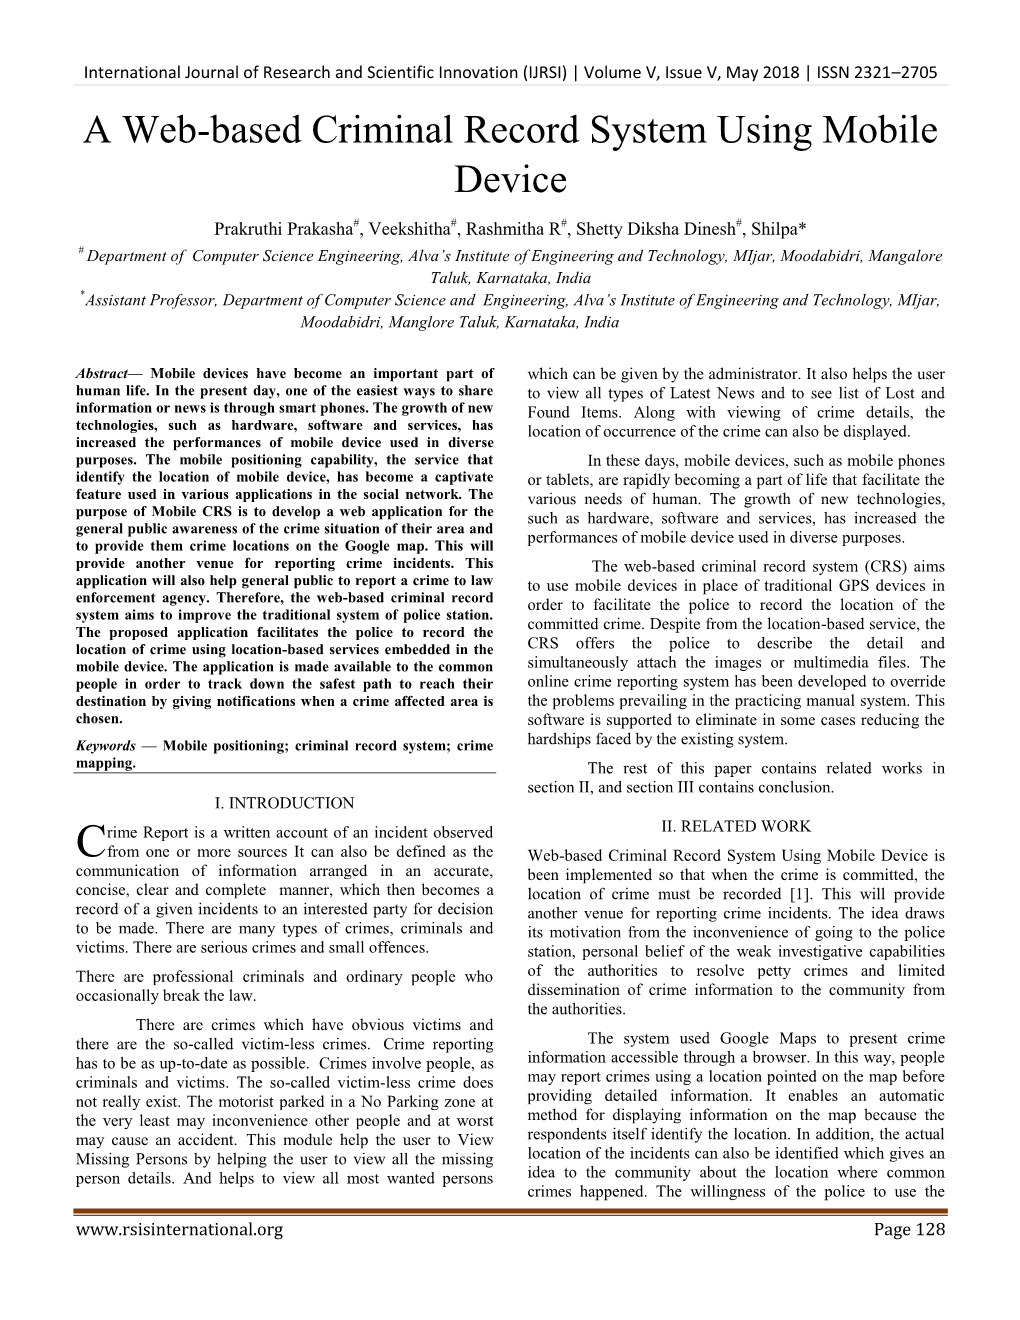 A Web-Based Criminal Record System Using Mobile Device